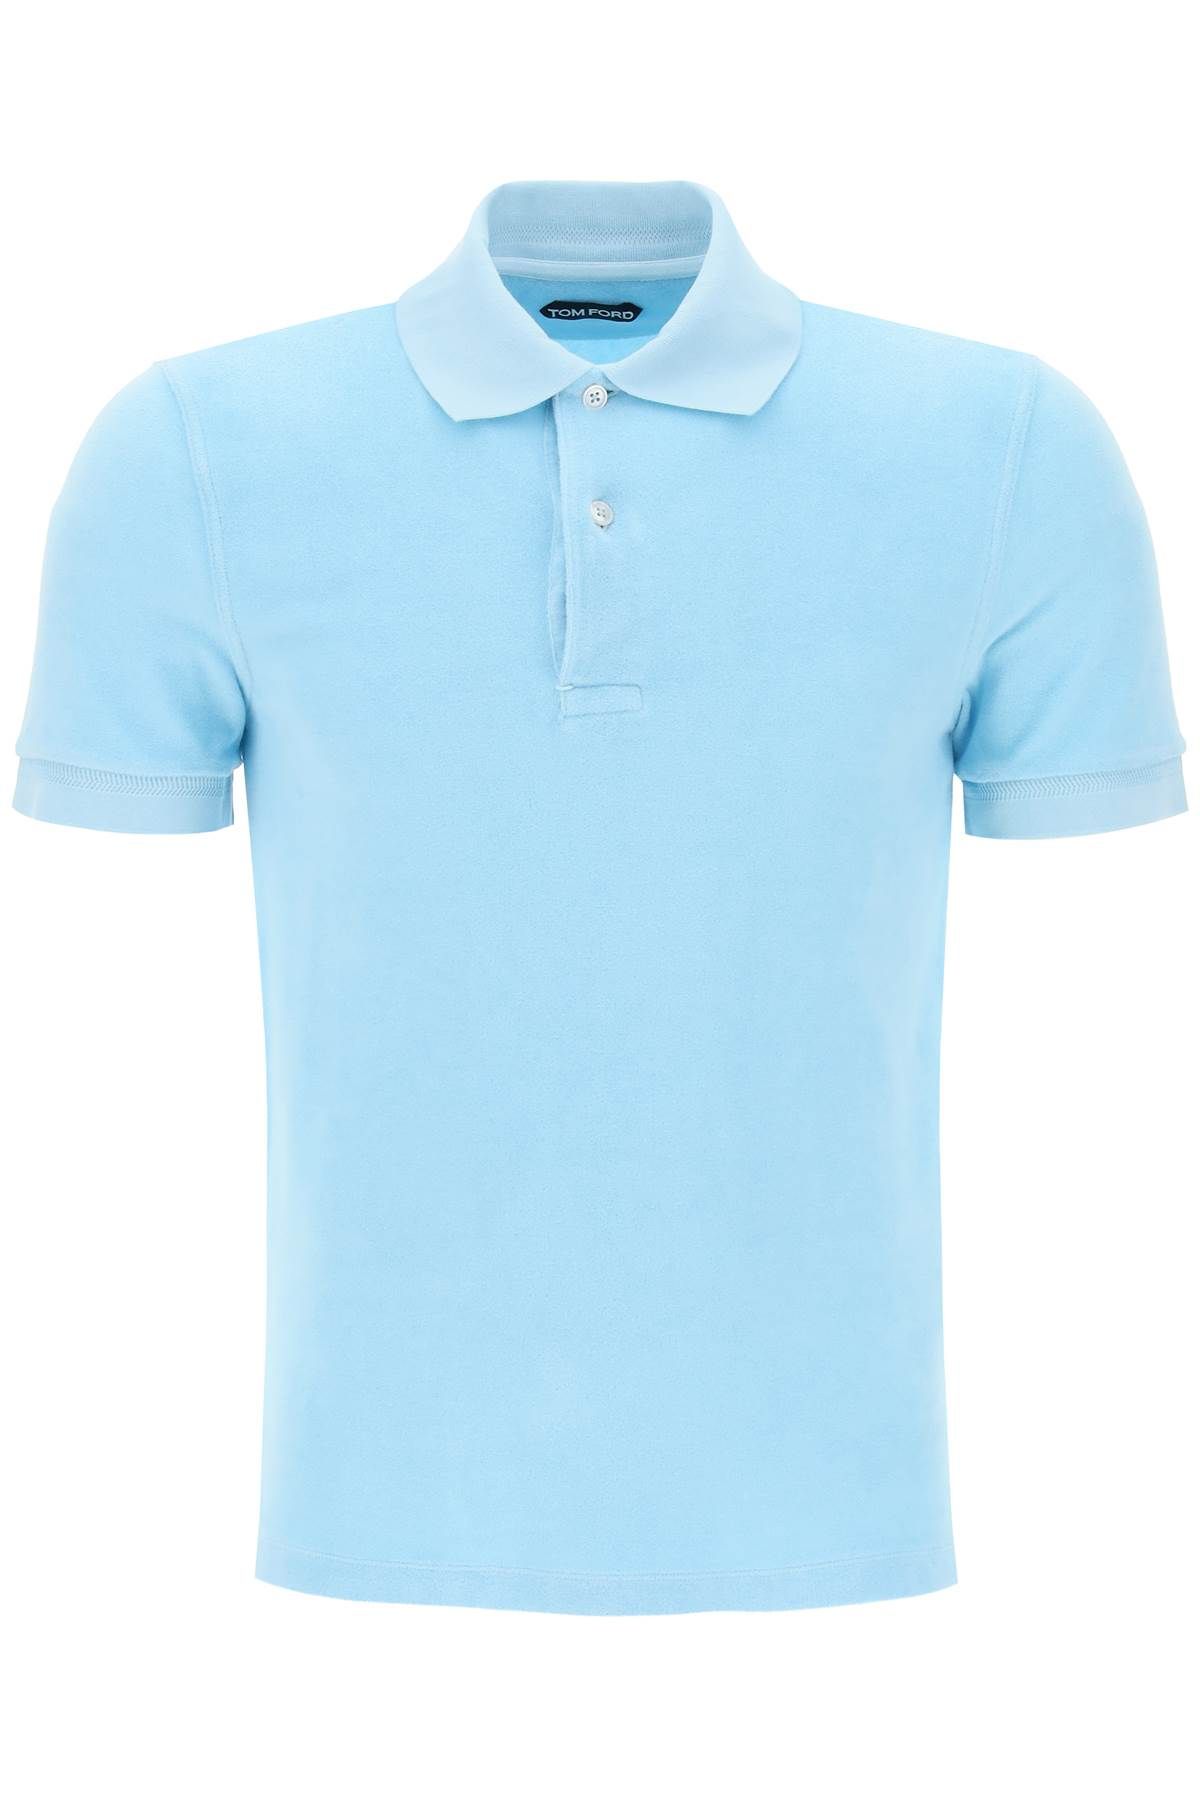 TOM FORD lightweight terry cloth polo